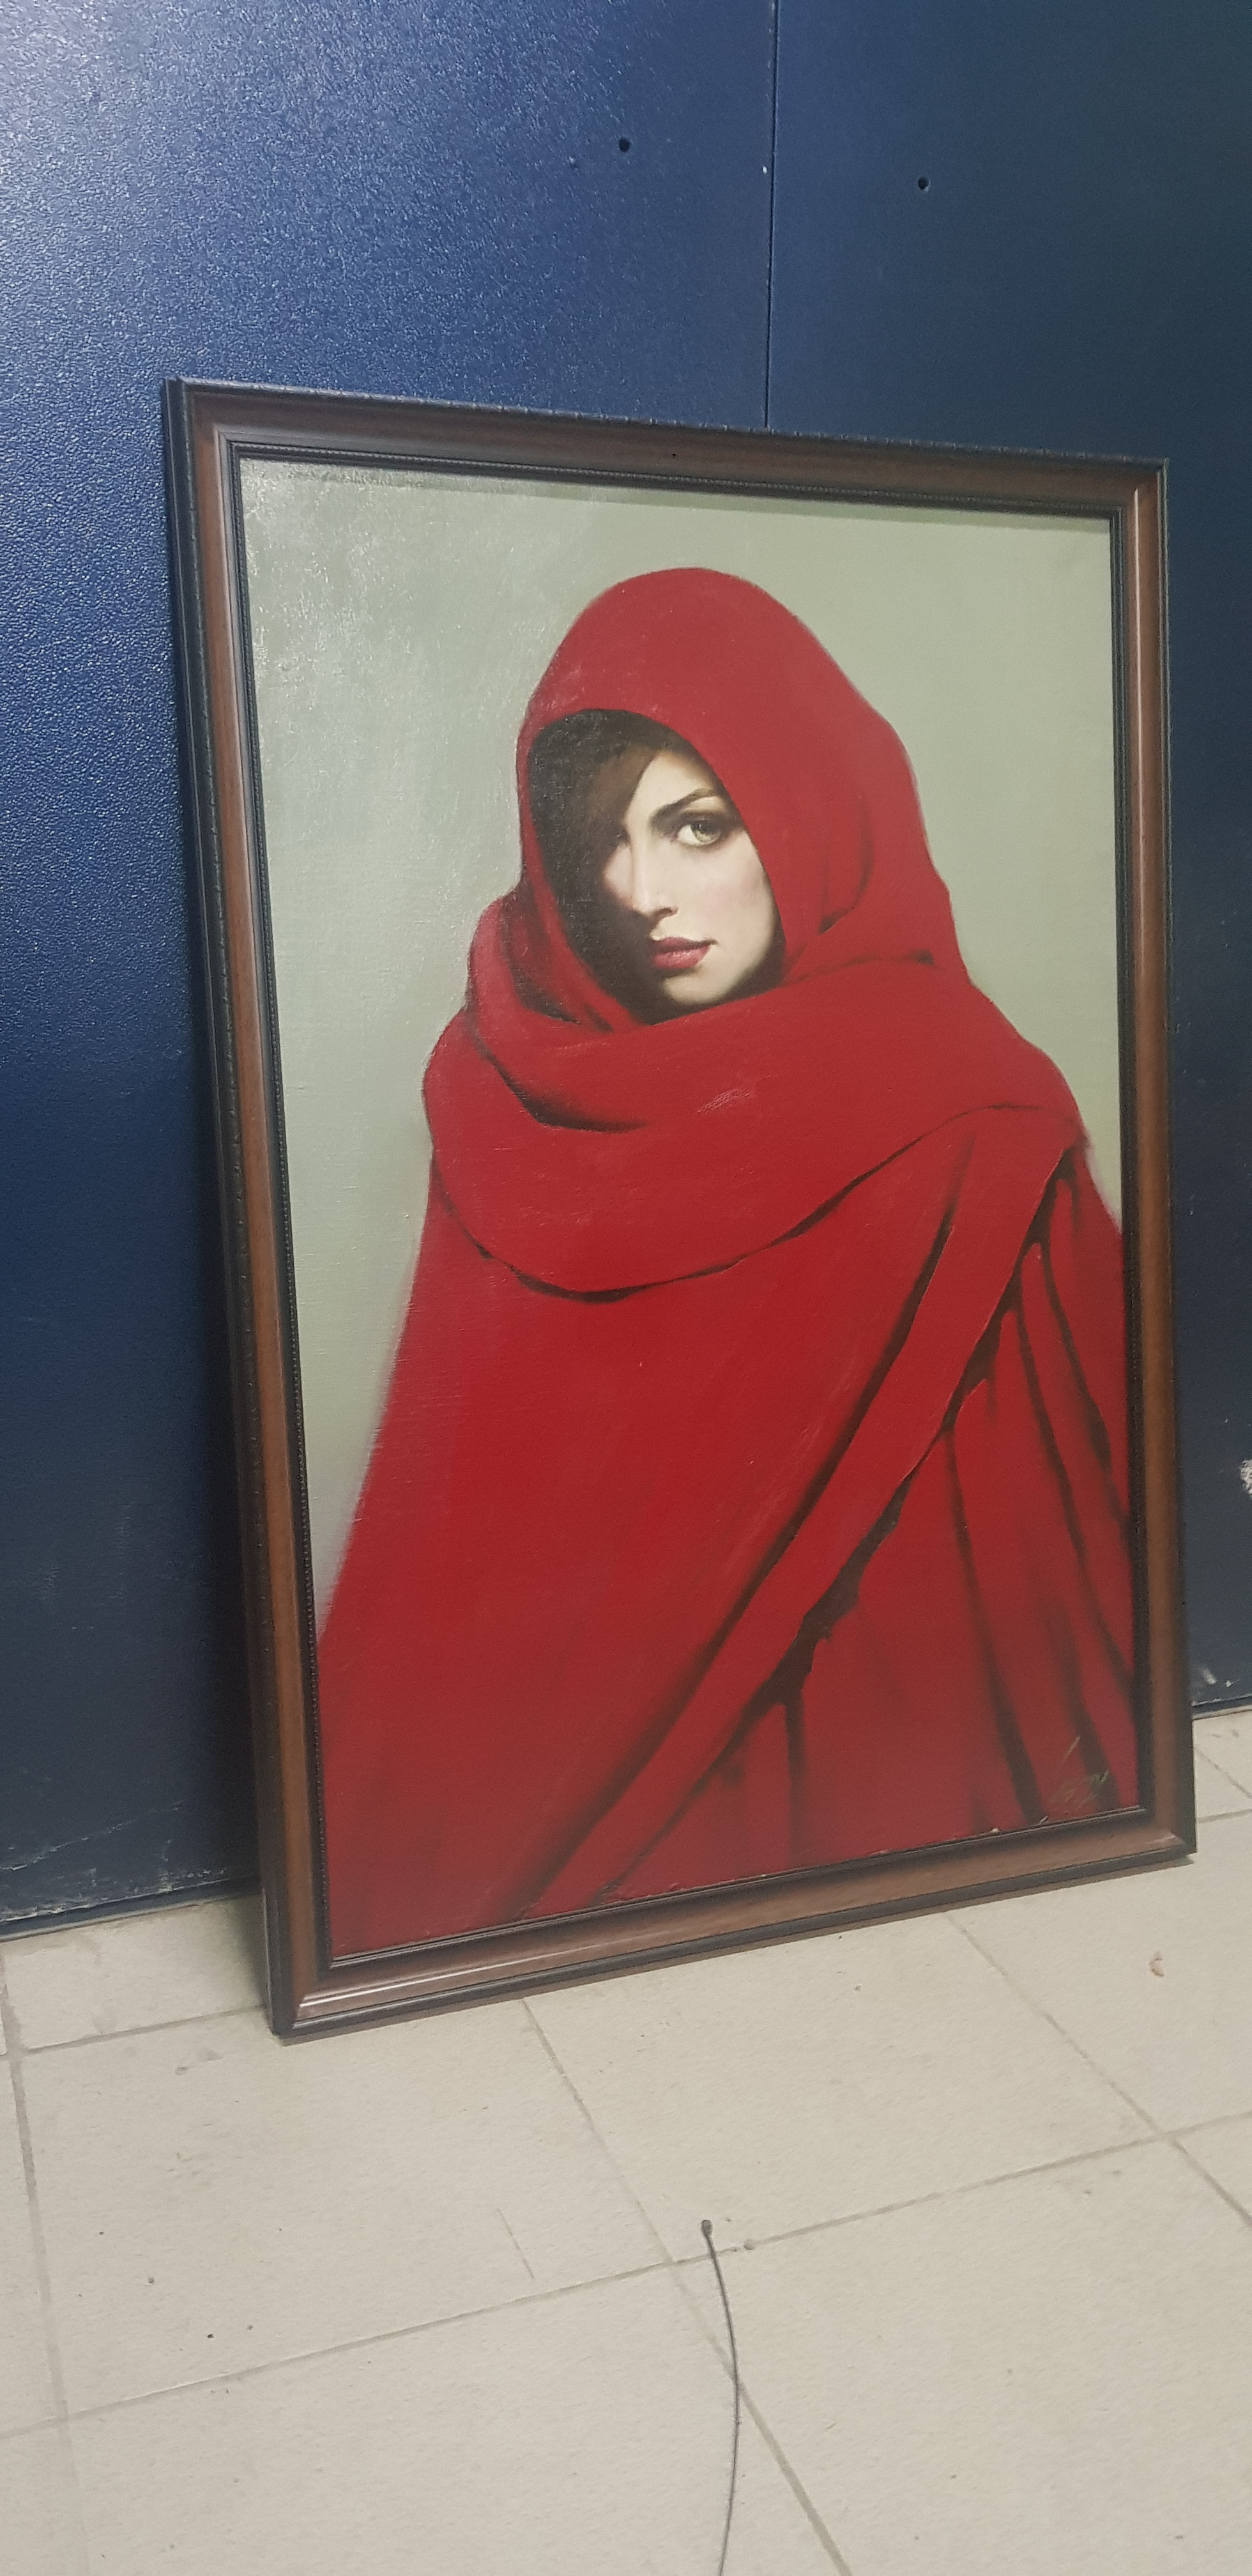 The Woman in Red